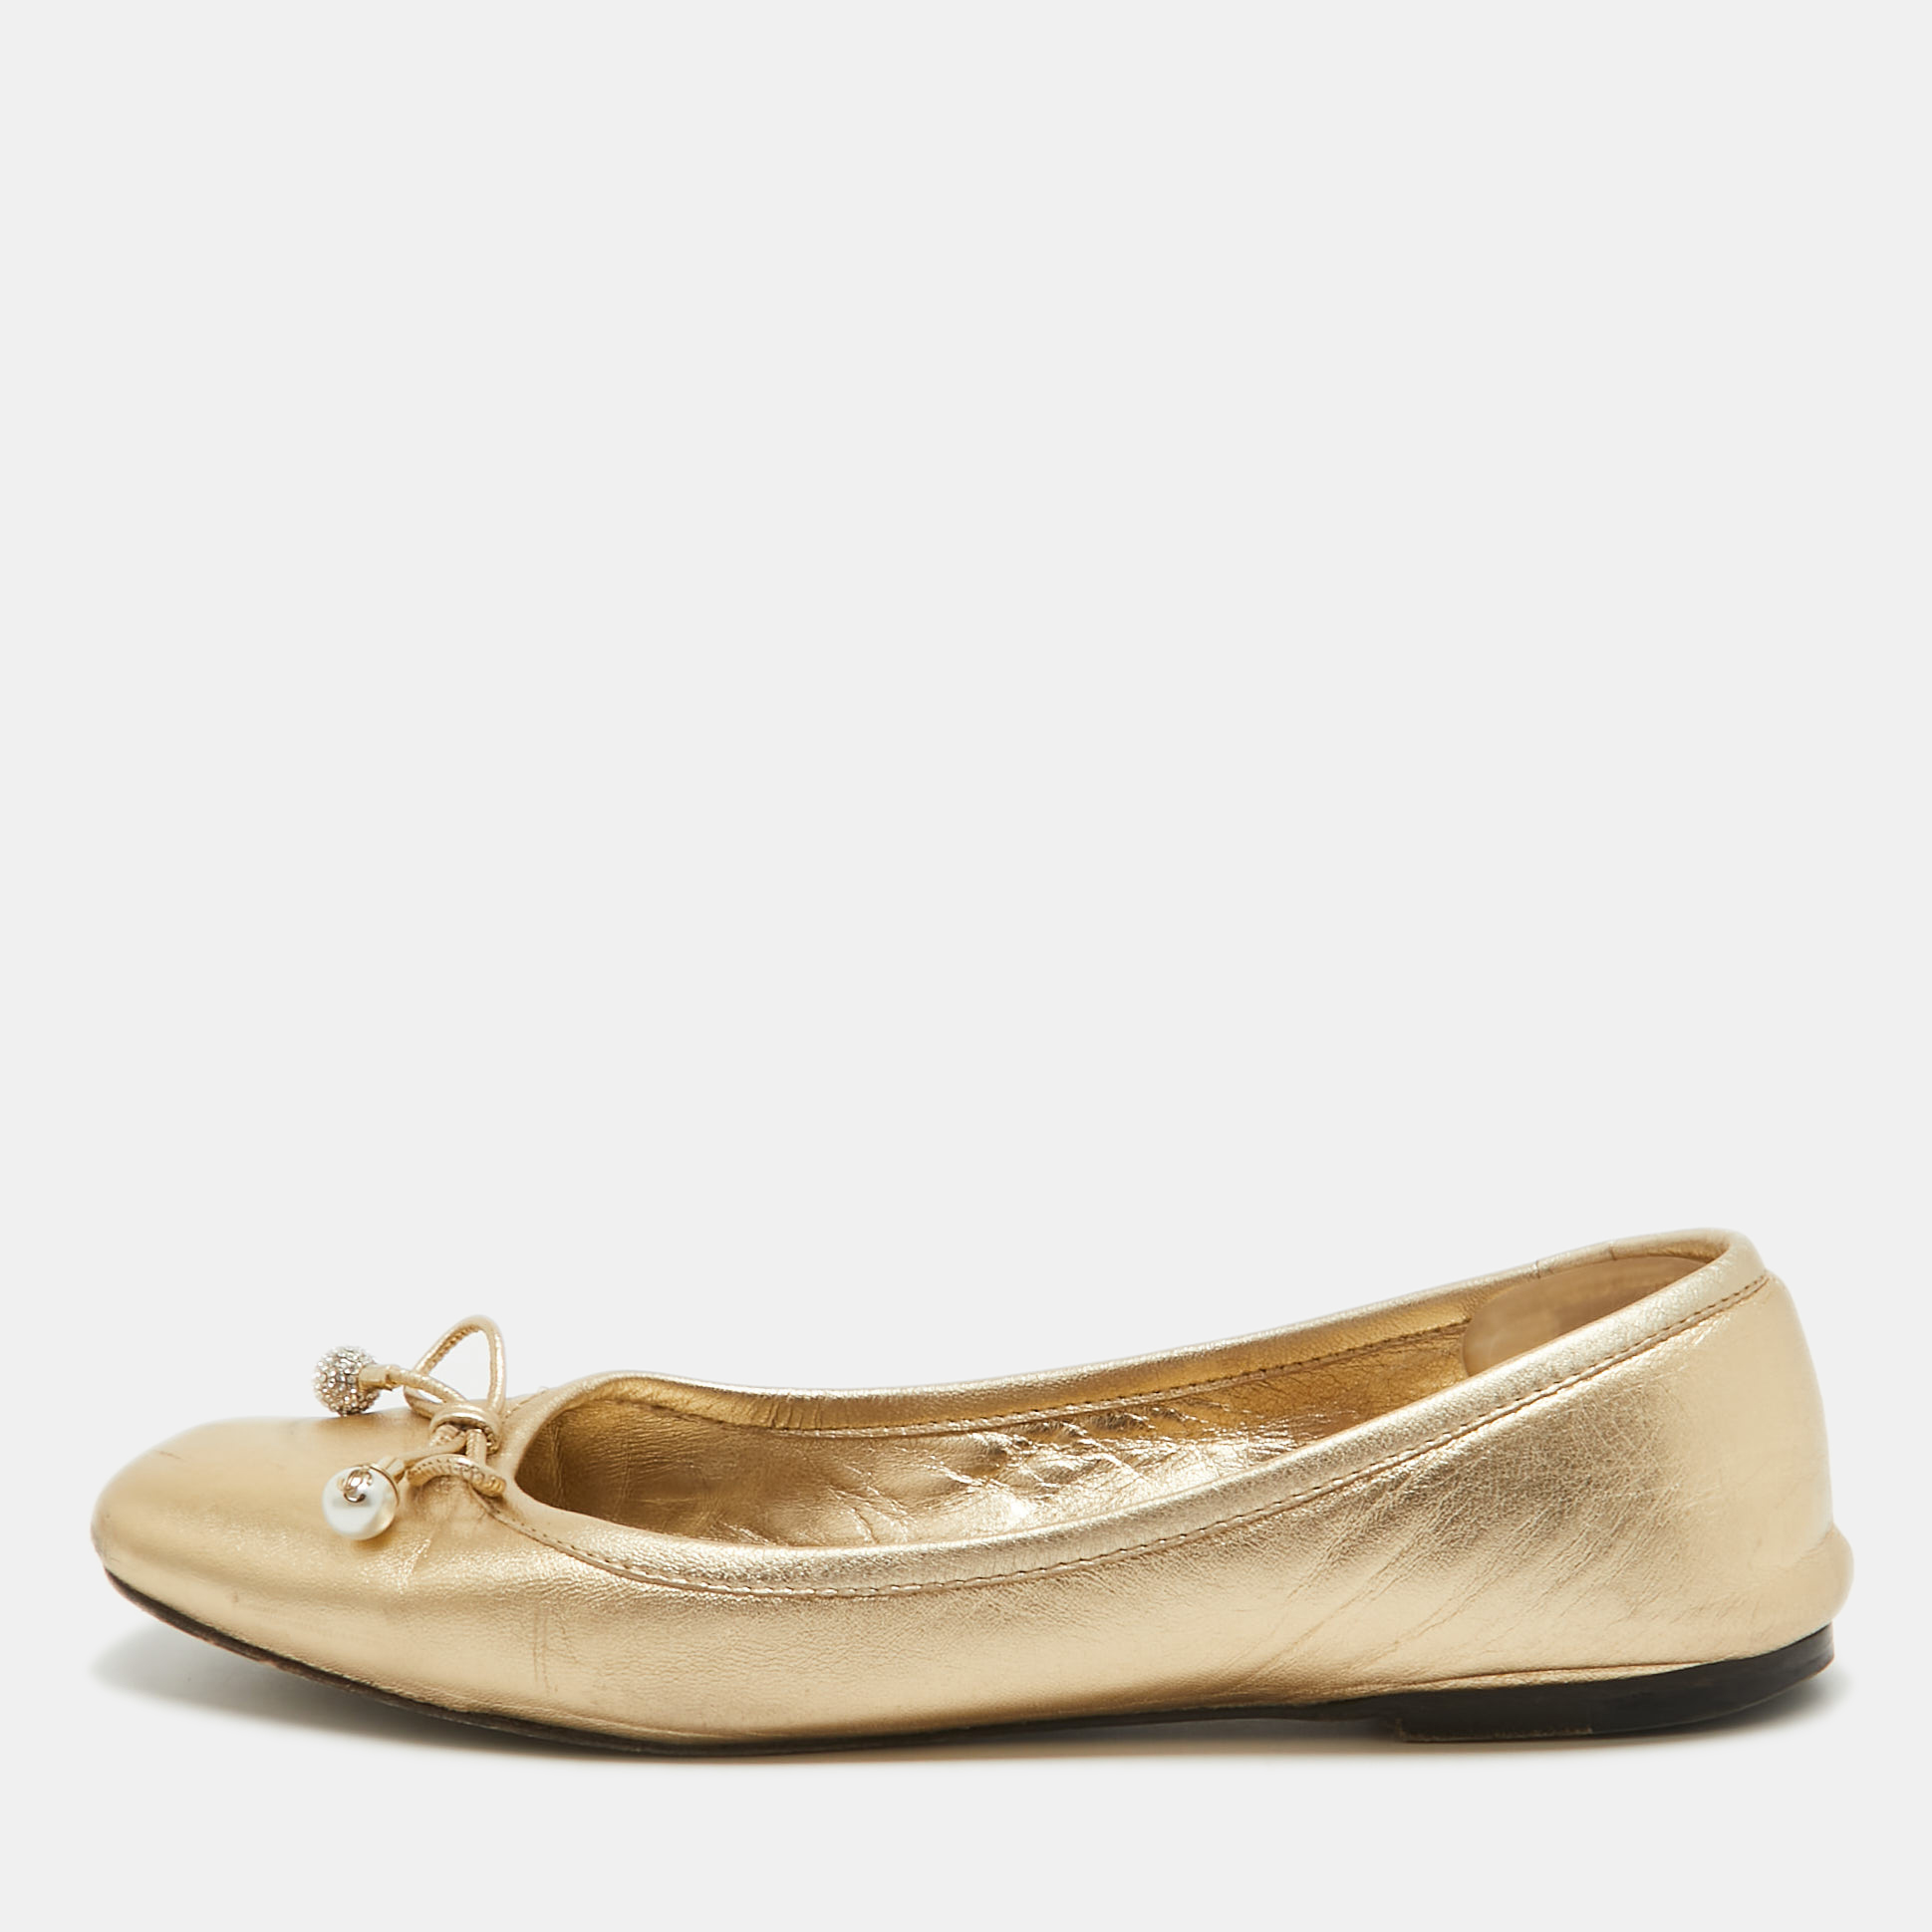 Pre-owned Jimmy Choo Gold Leather Ballet Flats Size 36